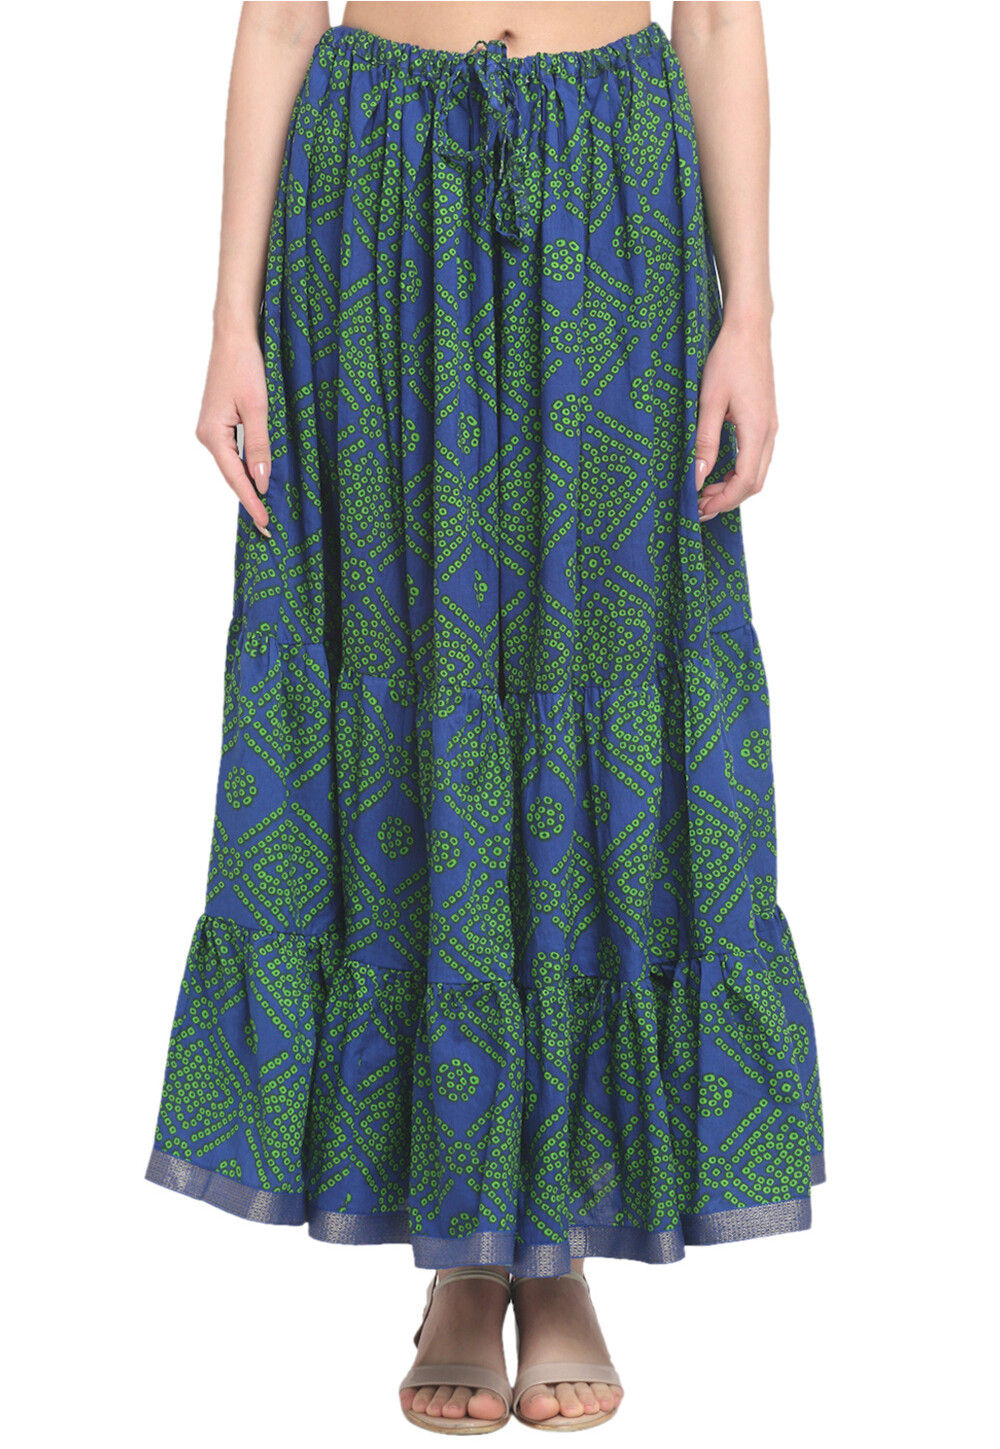 Bandhej Pure Cotton Tiered Skirt in Navy Blue : BRJ807